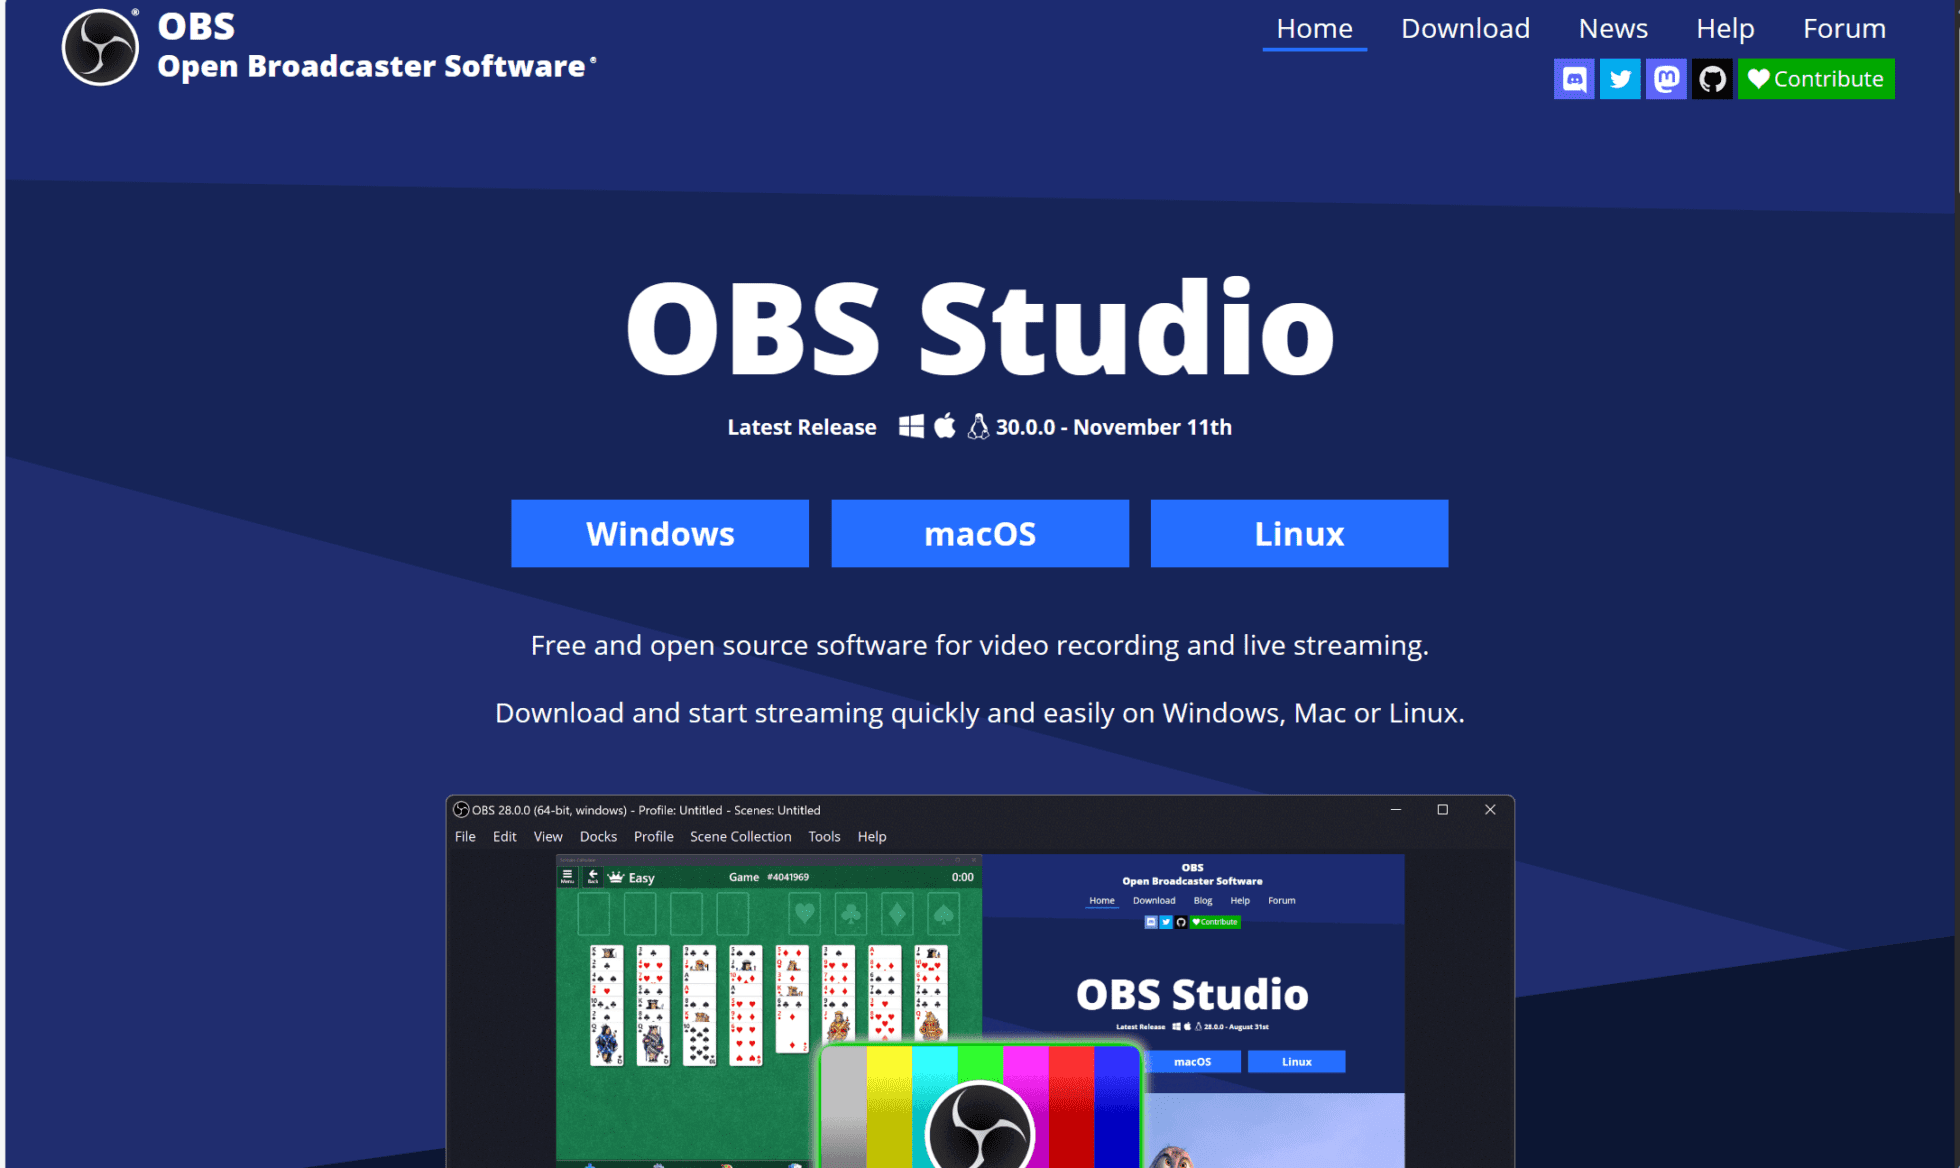 OBS Studio is completely free, but does that make it the best?